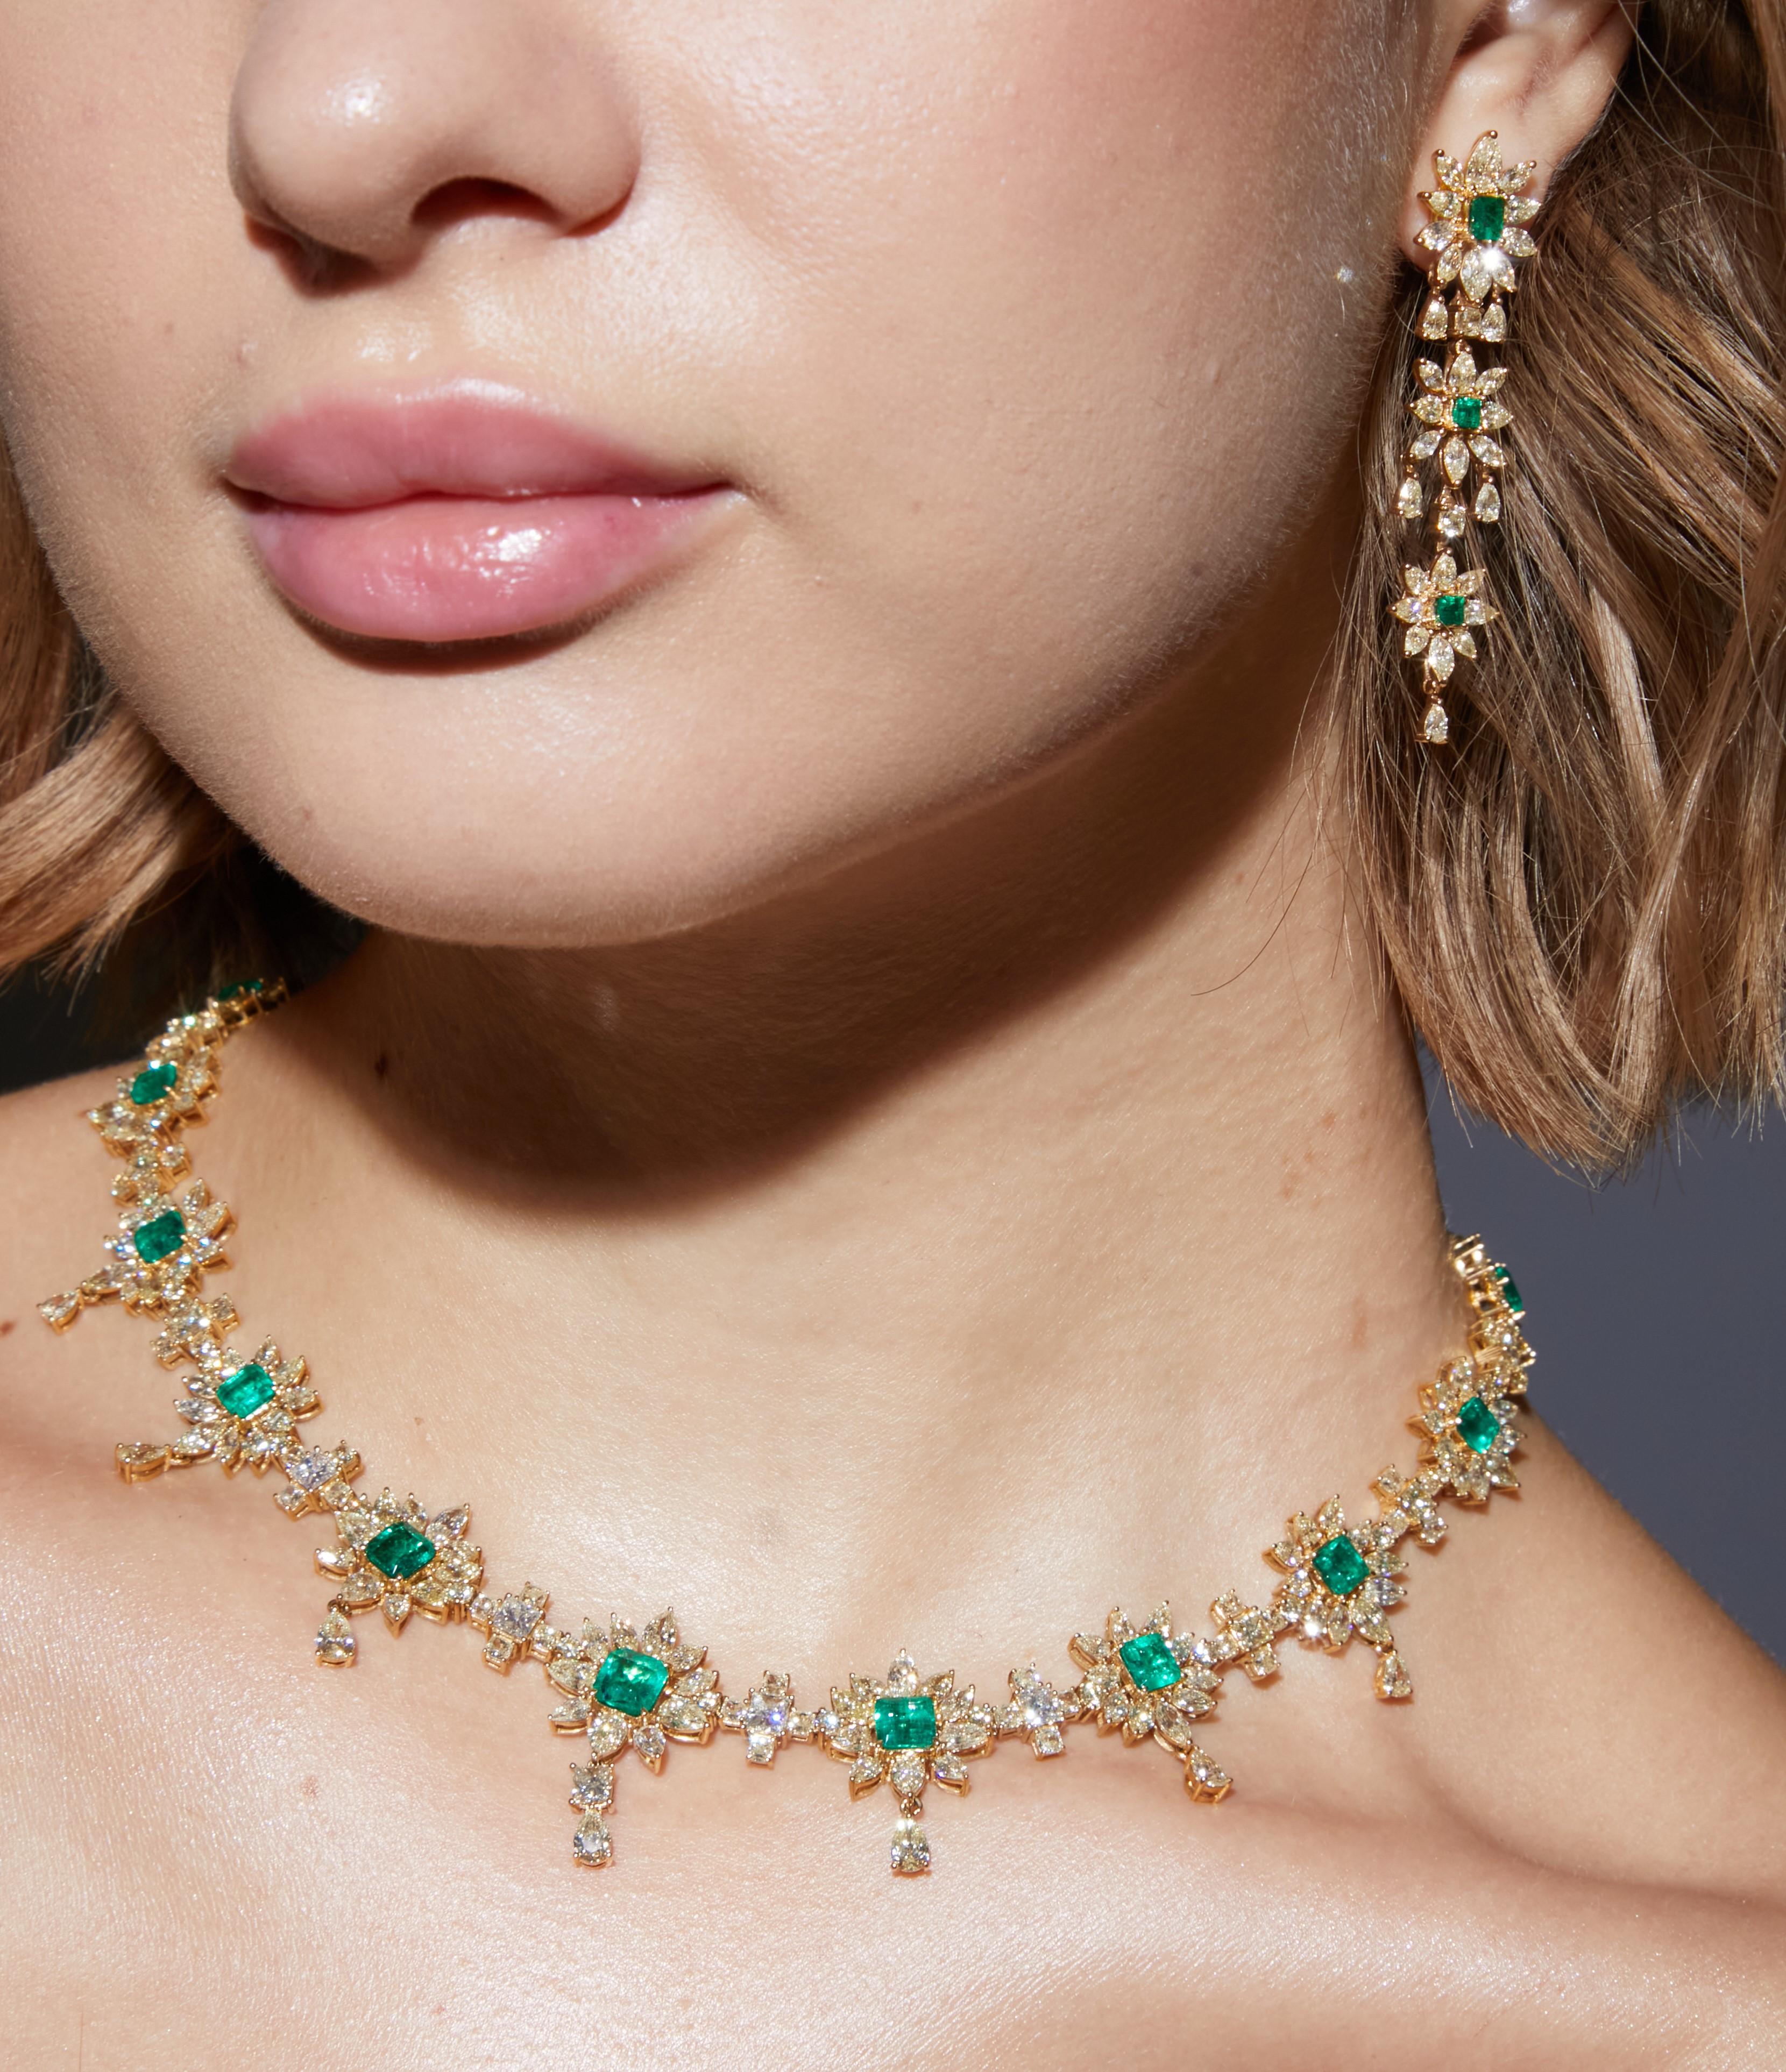 Sunflower Emeralds by Sunita Nahata Fine Design. This collection features vibrant green emeralds set on a bed of stunning yellow diamonds set in yellow gold. This is a dainty and delicate bridal necklace that still exudes a glamorous and luxurious